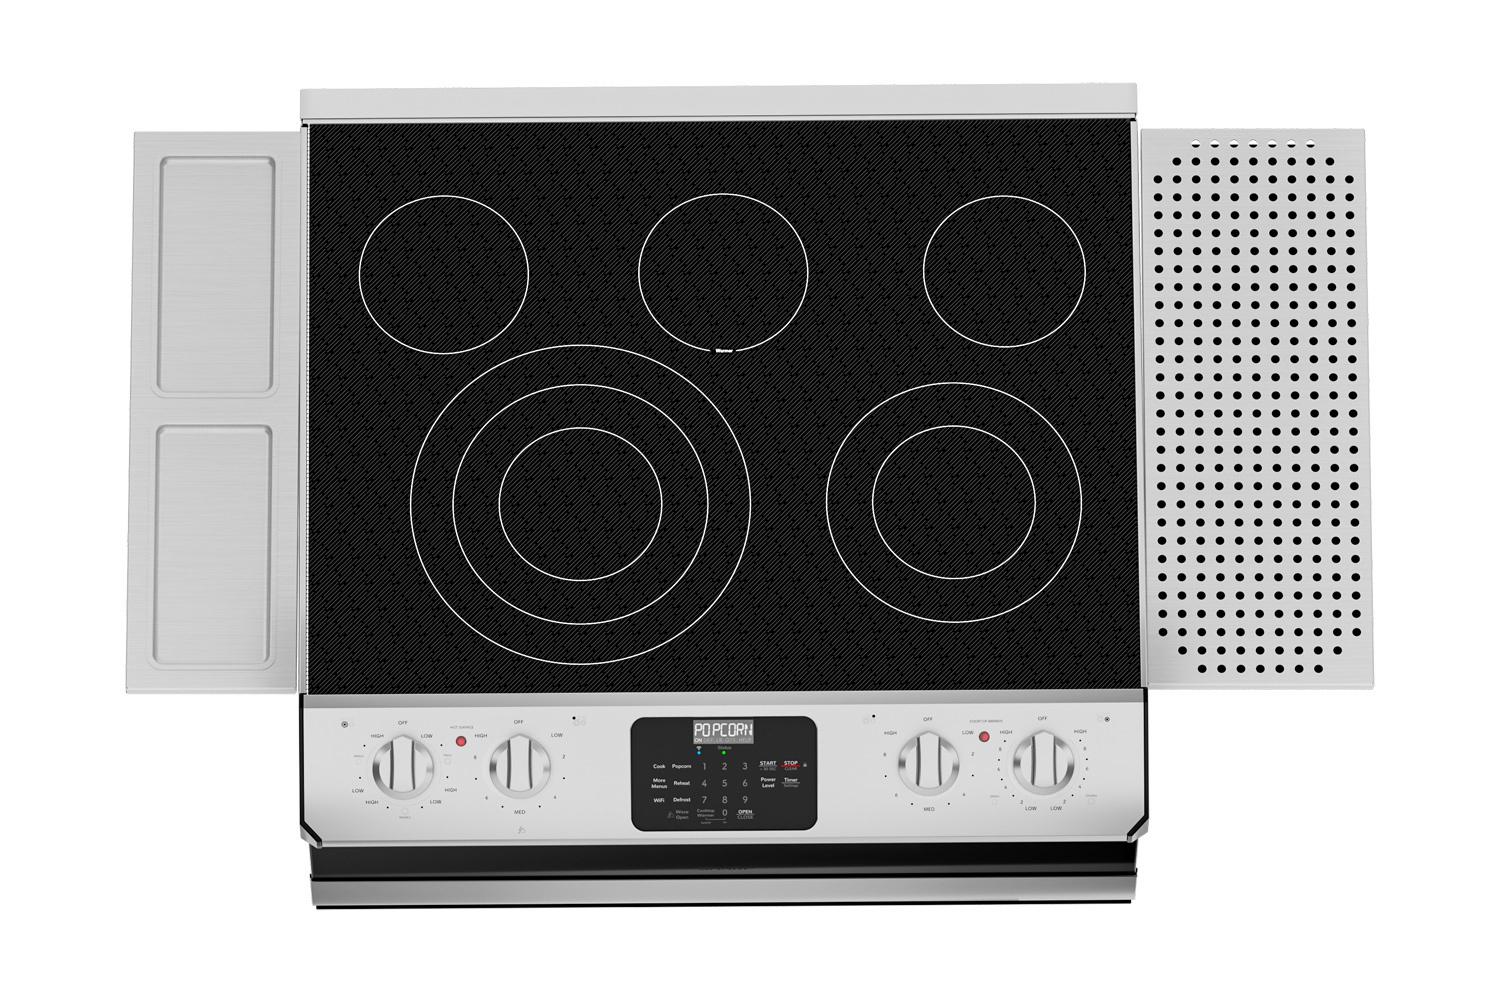 Sharp Smart Radiant Rangetop with Microwave Drawer Oven